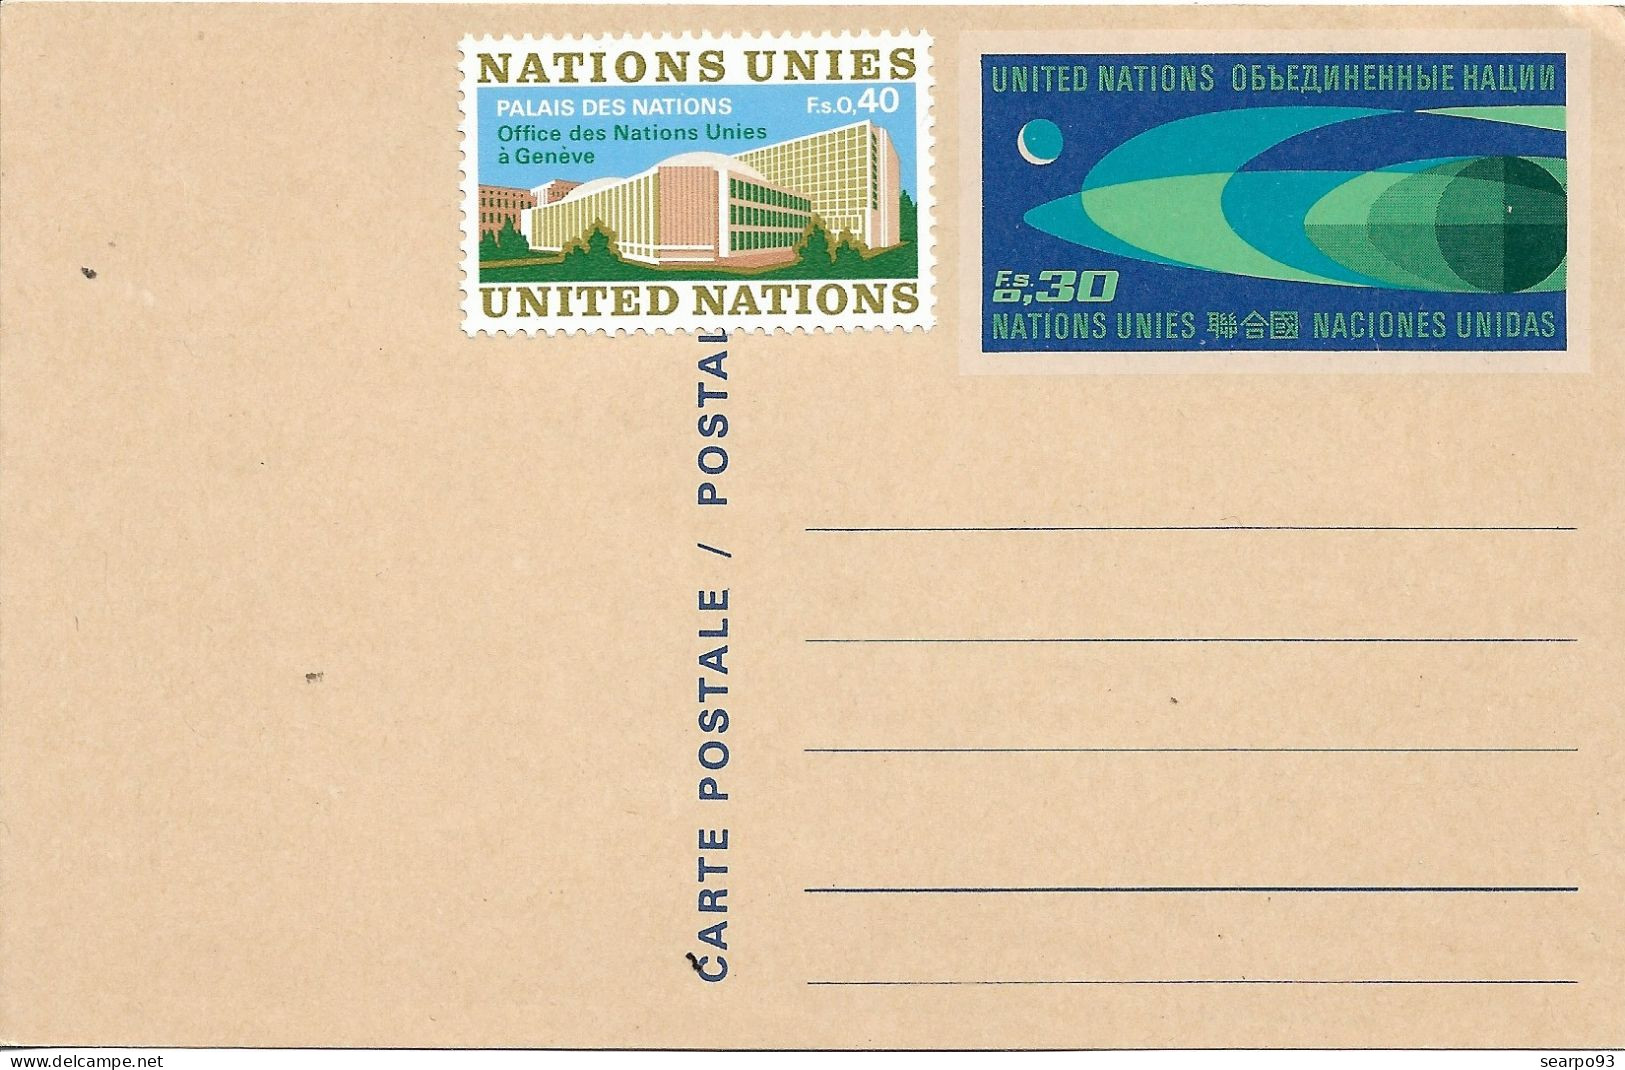 UNITED NATIONS. AIR LETTER. POSTAL STATIONERY WITH ADDITIONAL POSTAGE - Airmail